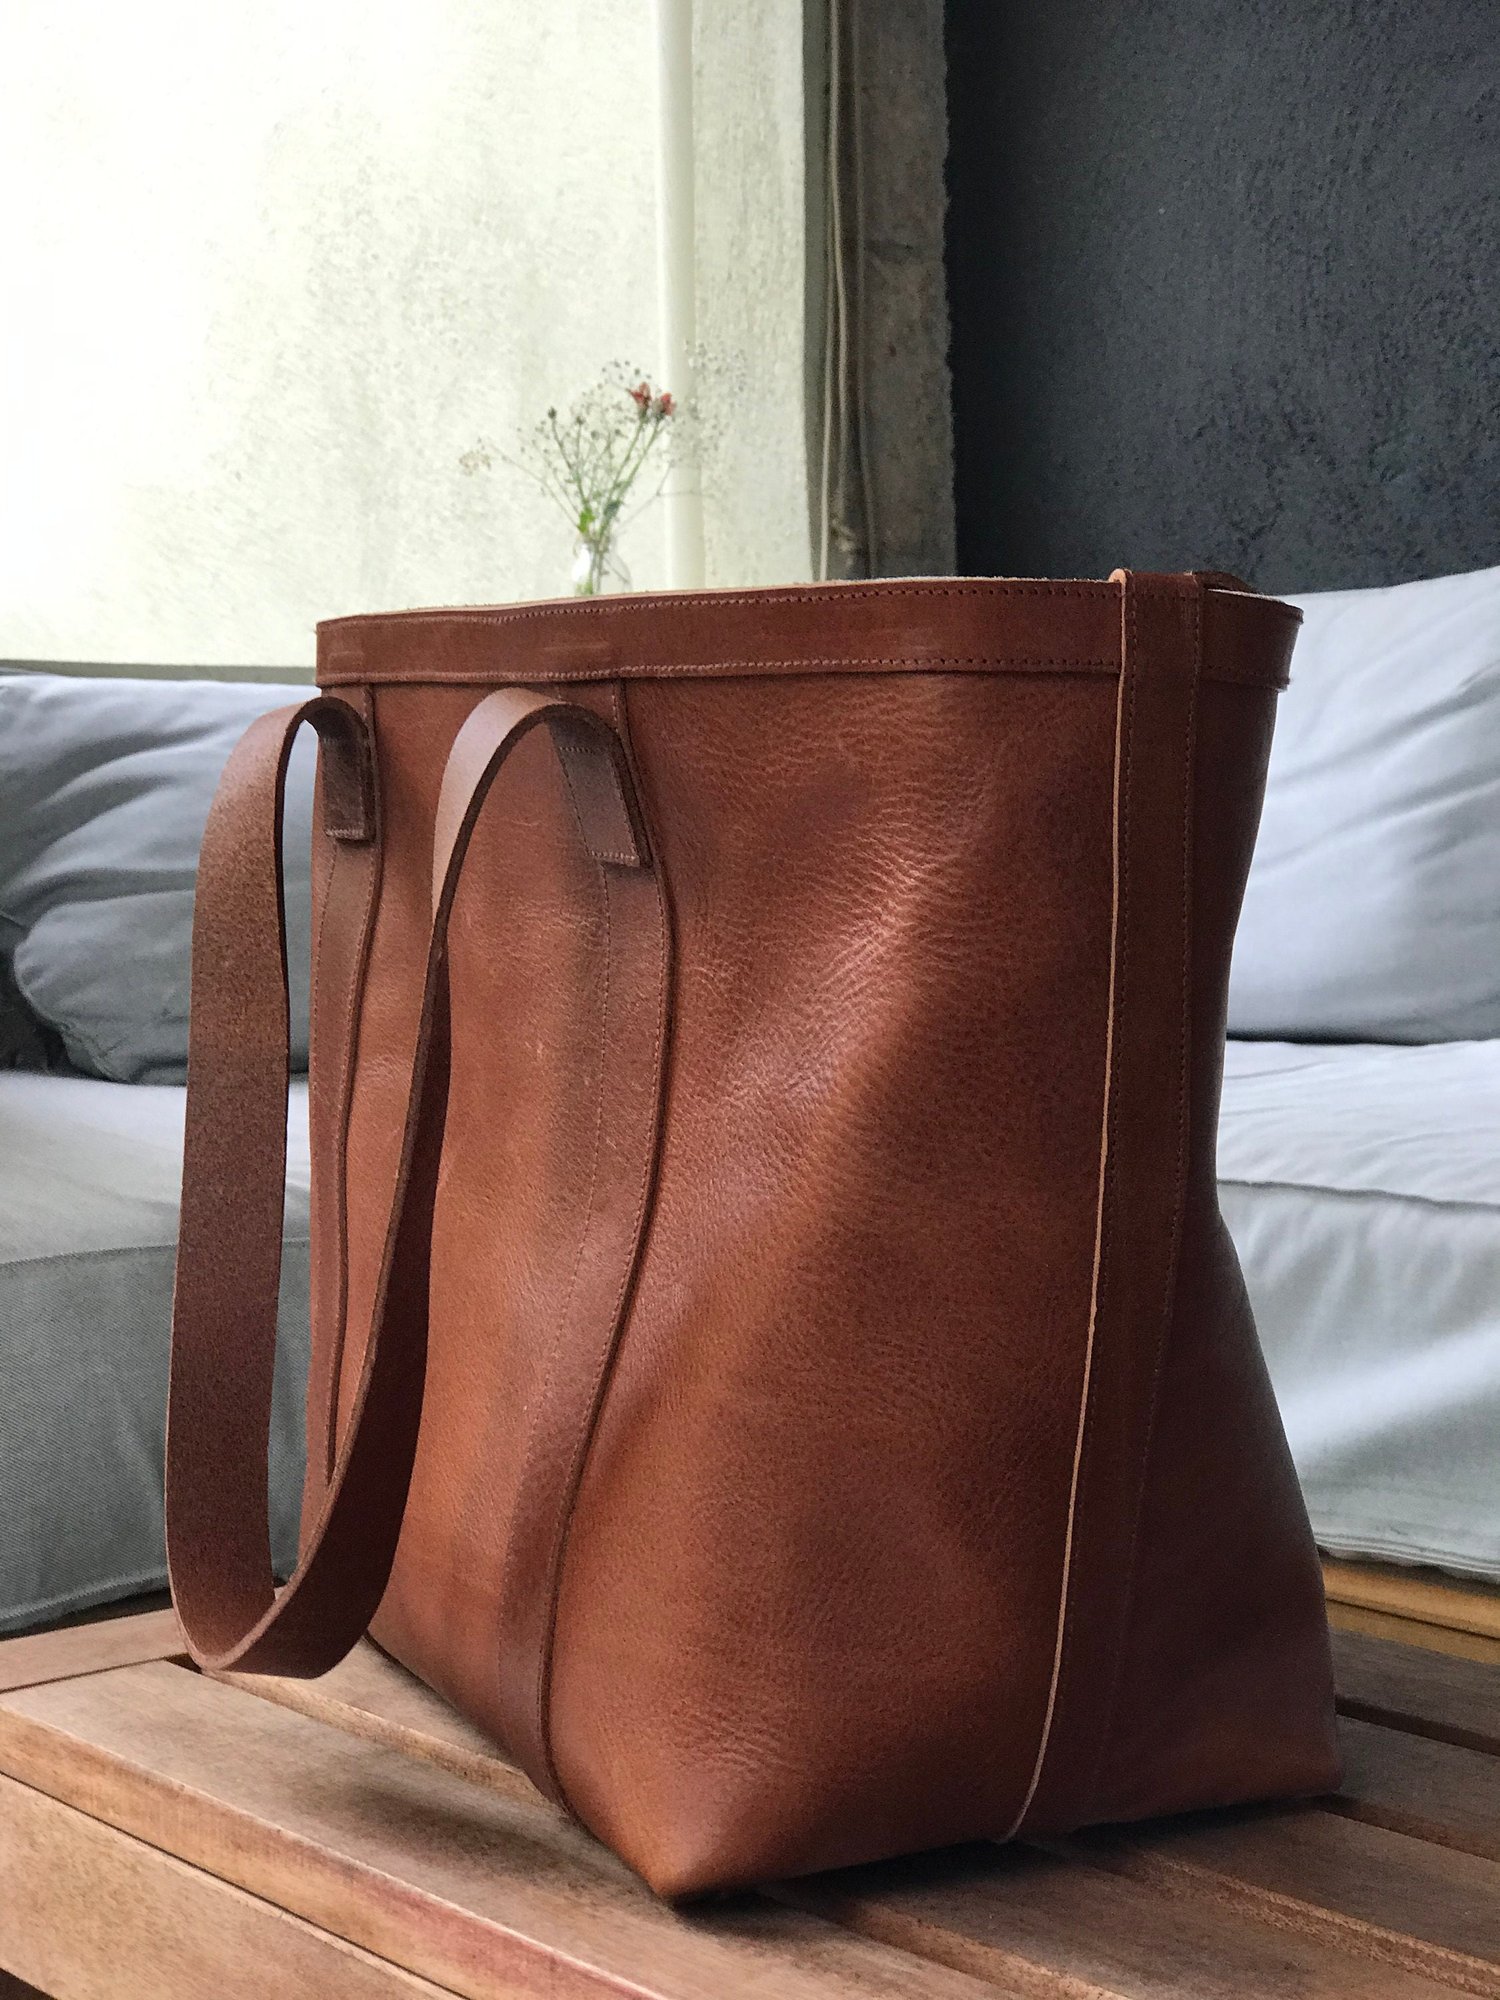 Oversized Cognac Leather bag with zipper and inside lining. Rocabruna  leather bag in tan leather. Classy Diaper and work bag. Handmade. — Vermut  Atelier